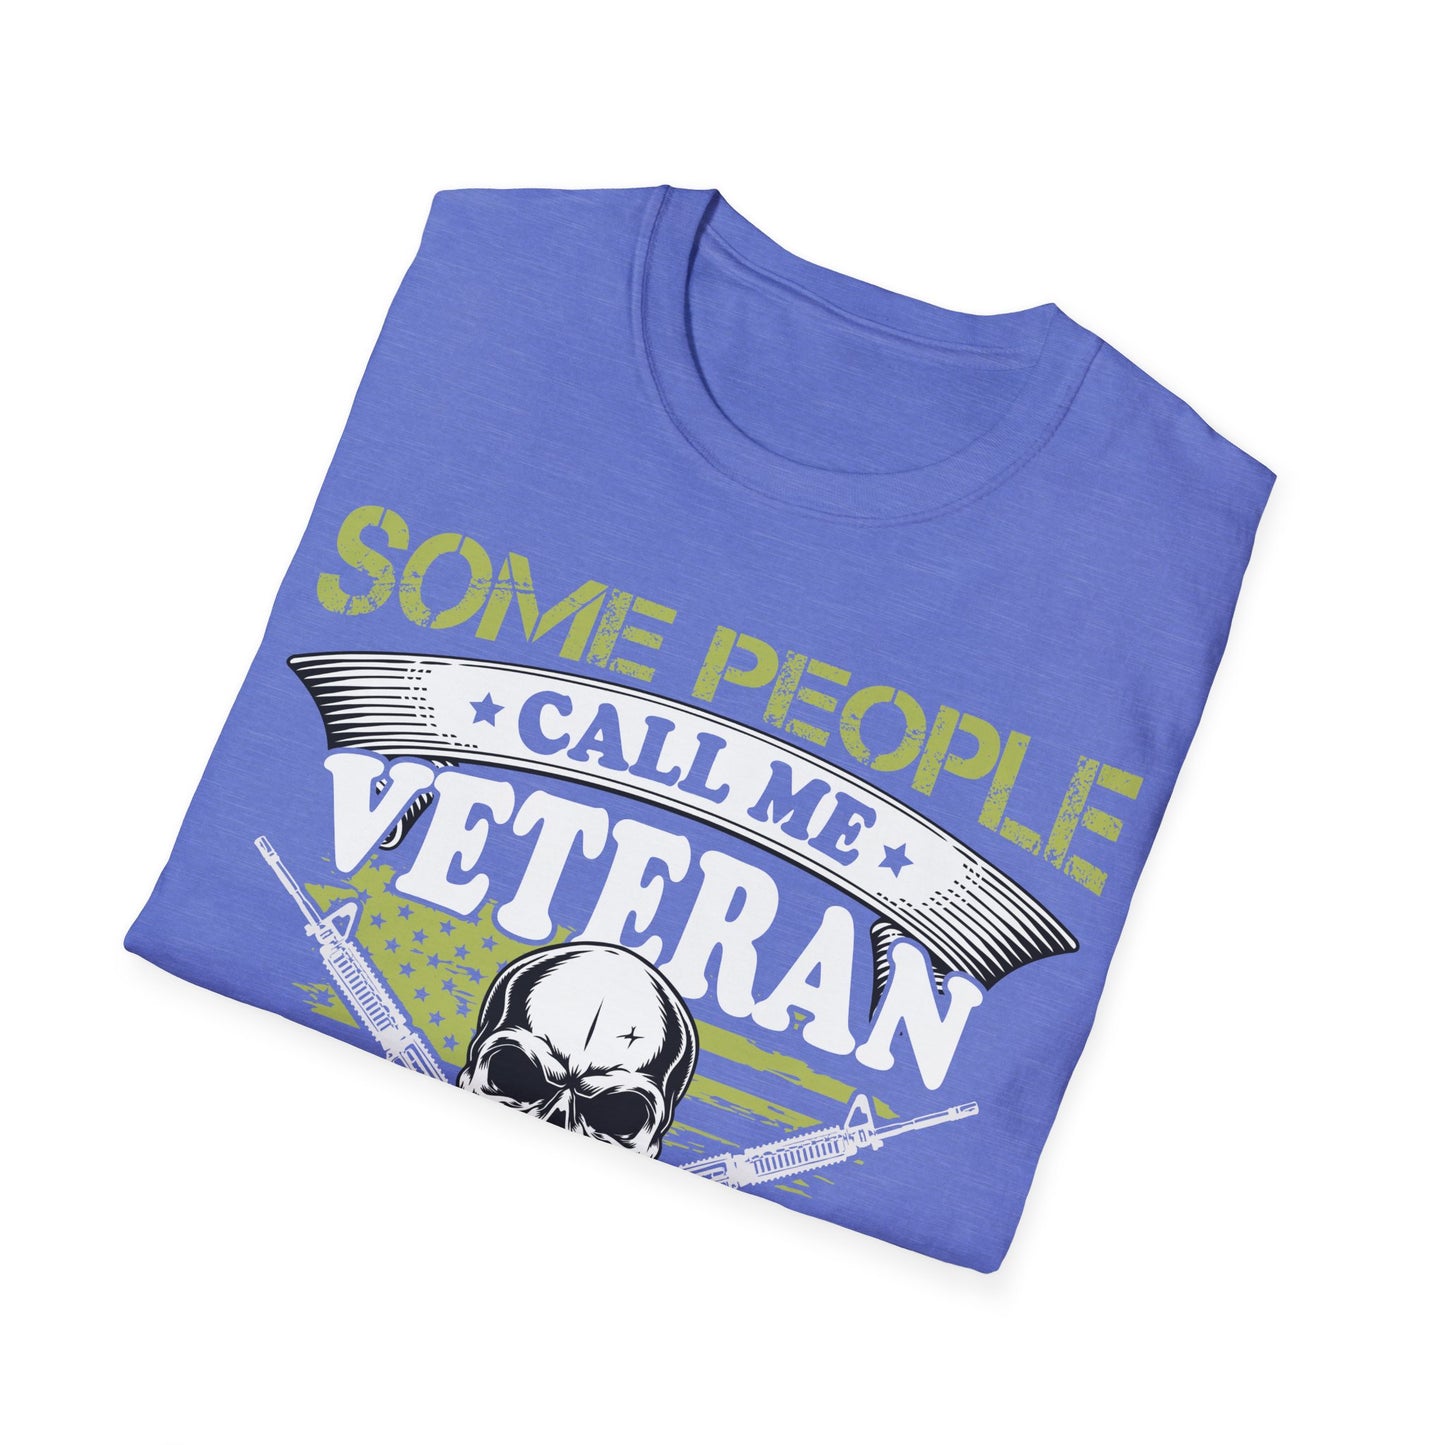 Some Call Me Veteran - Dad - Unisex Softstyle T-Shirt